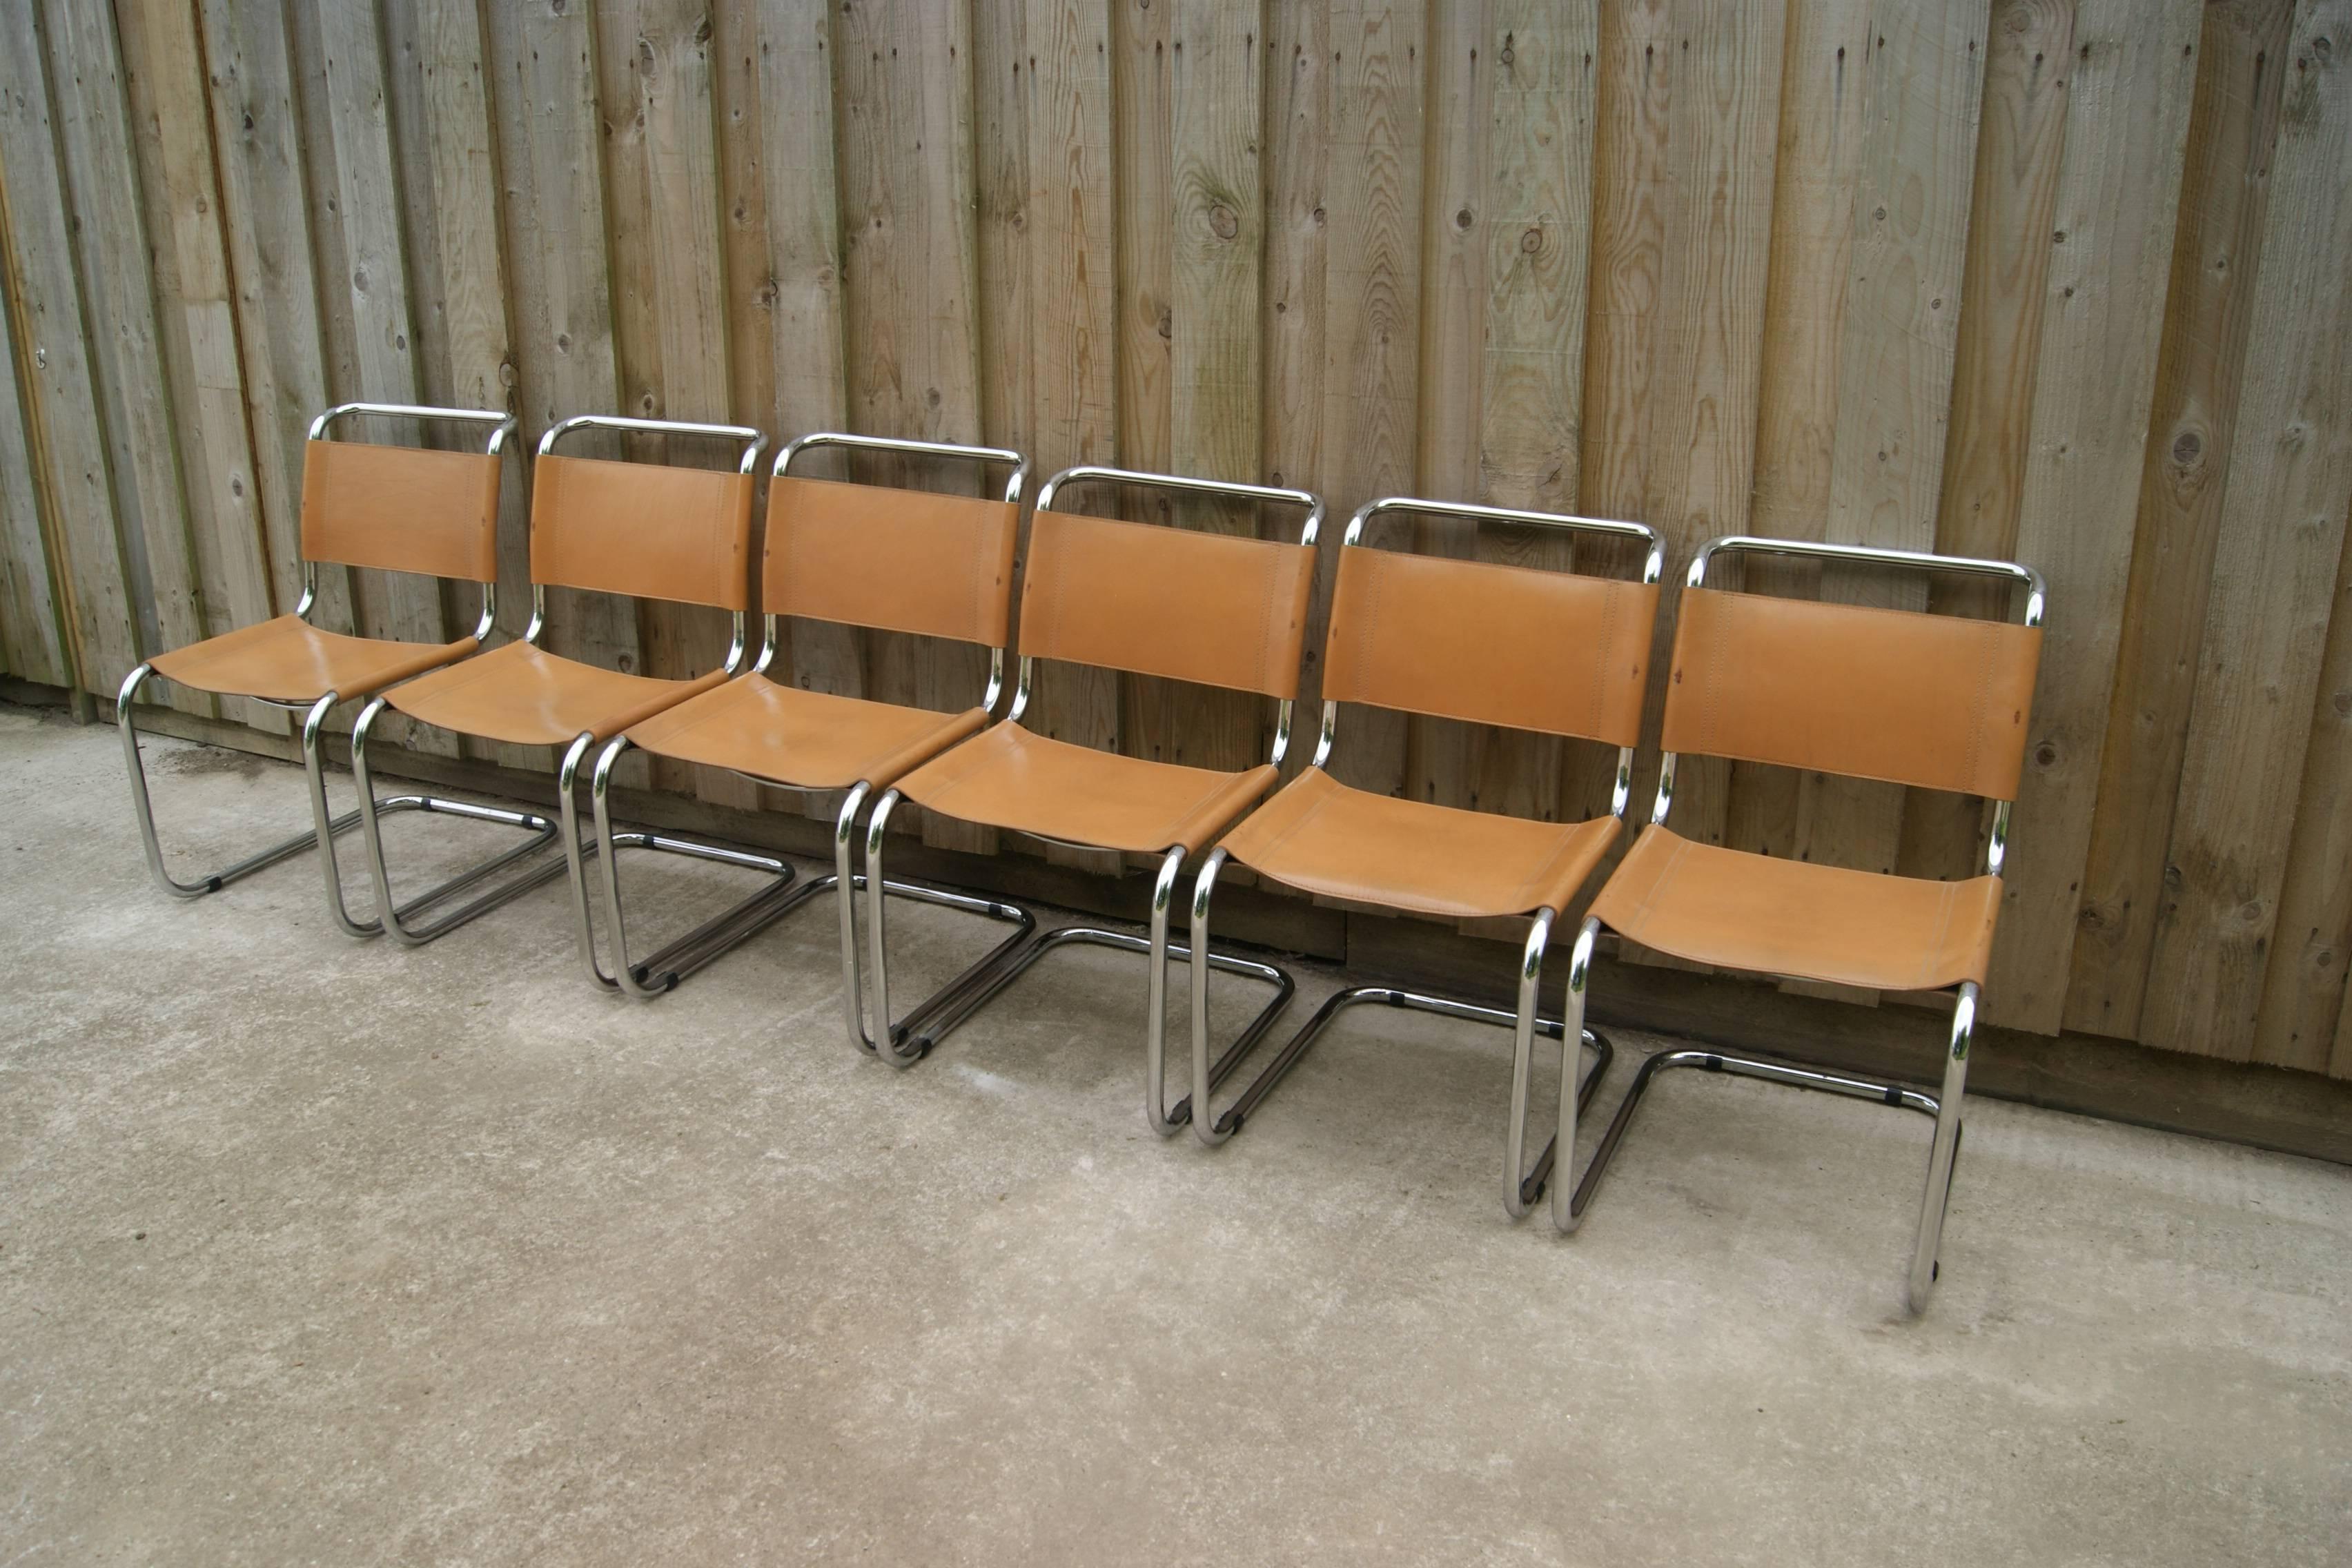 Set of six Bauhaus chairs designed by Mart Stam for Fasem Italy. The chairs feature a tubular steel frame, with thick saddle leather seat and backrest in tan. The chairs are in a good vintage condition, wear and tear consistent with age. With some